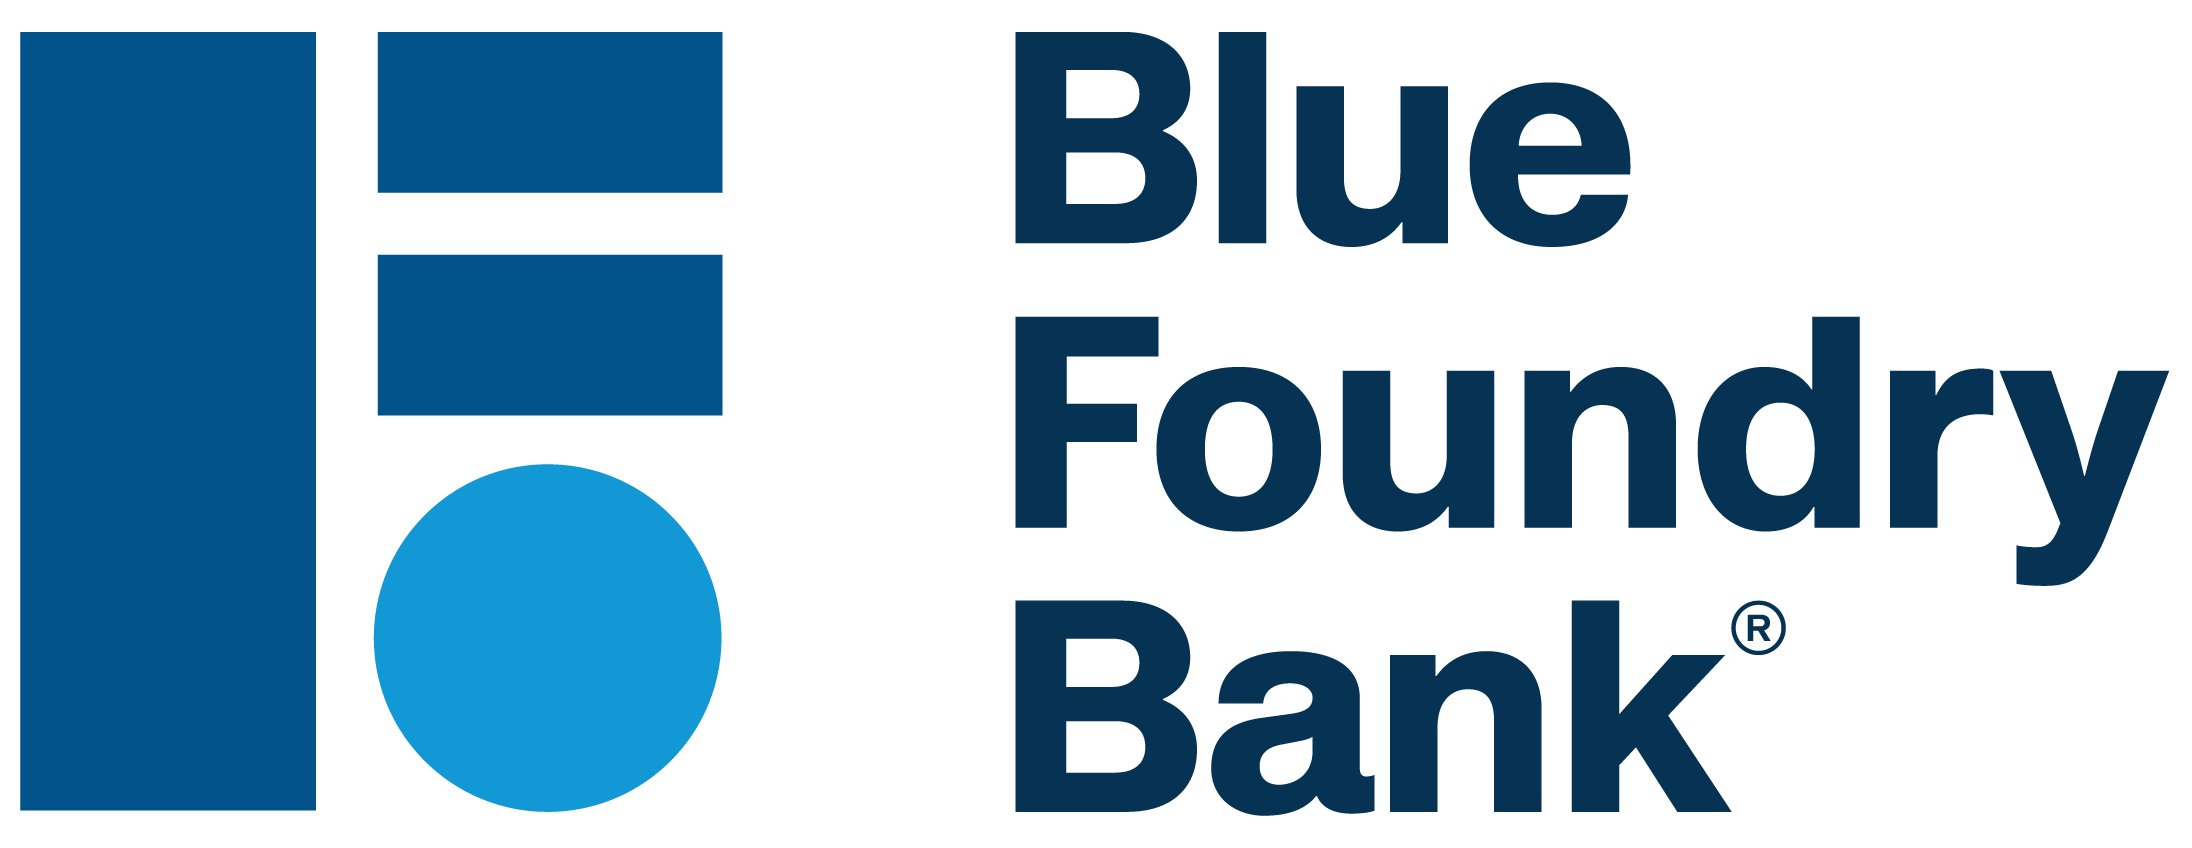 Blue Foundry Bank